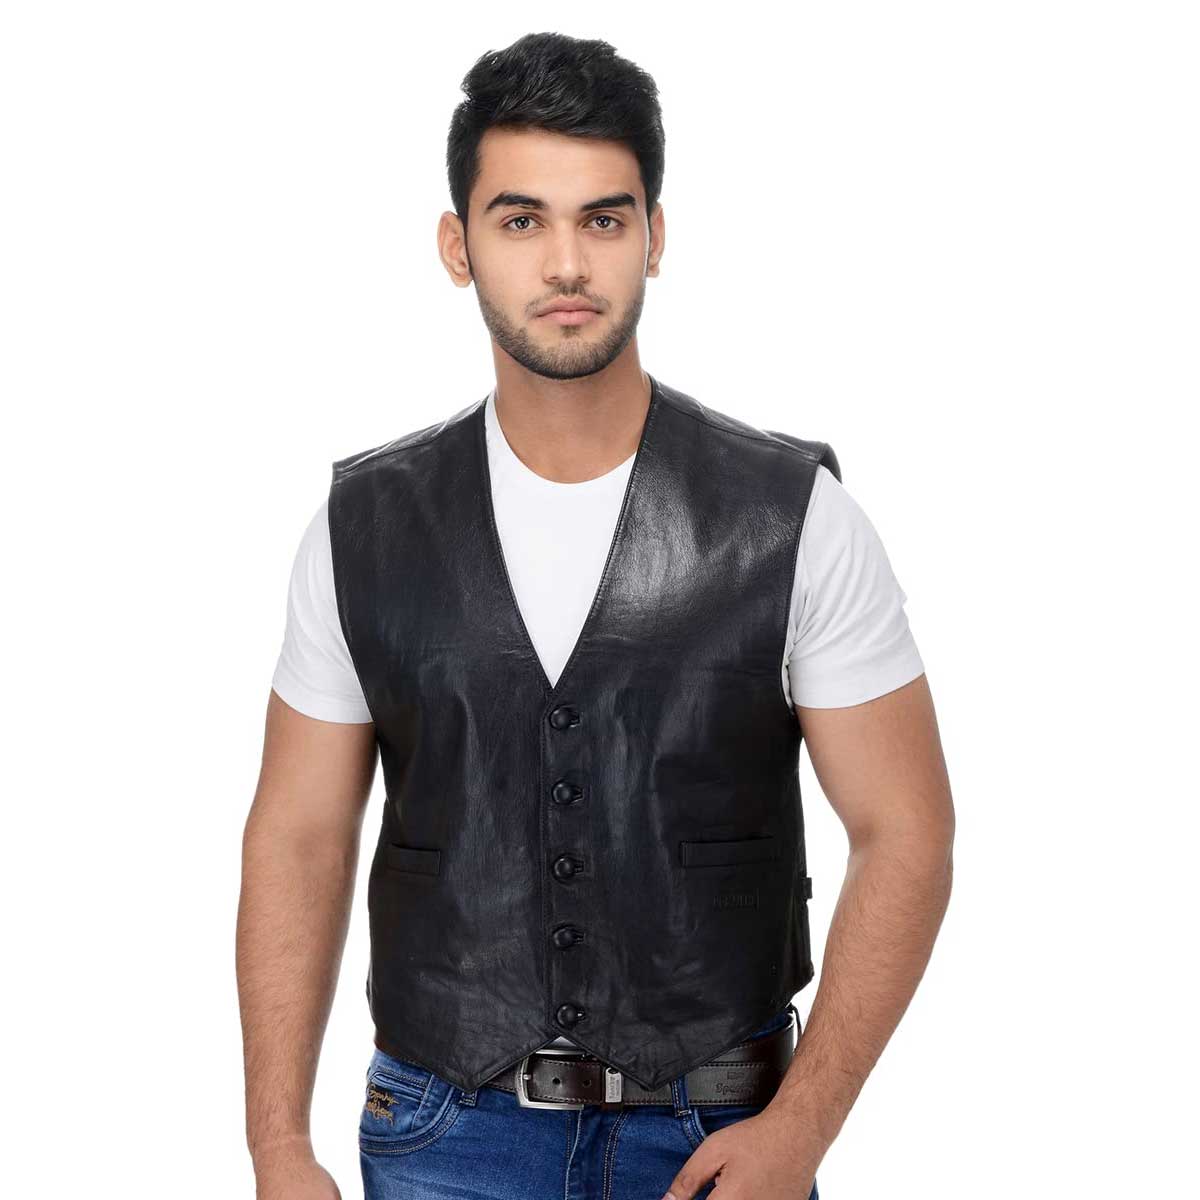 Leather Vest Manufacturers in Yakutsk